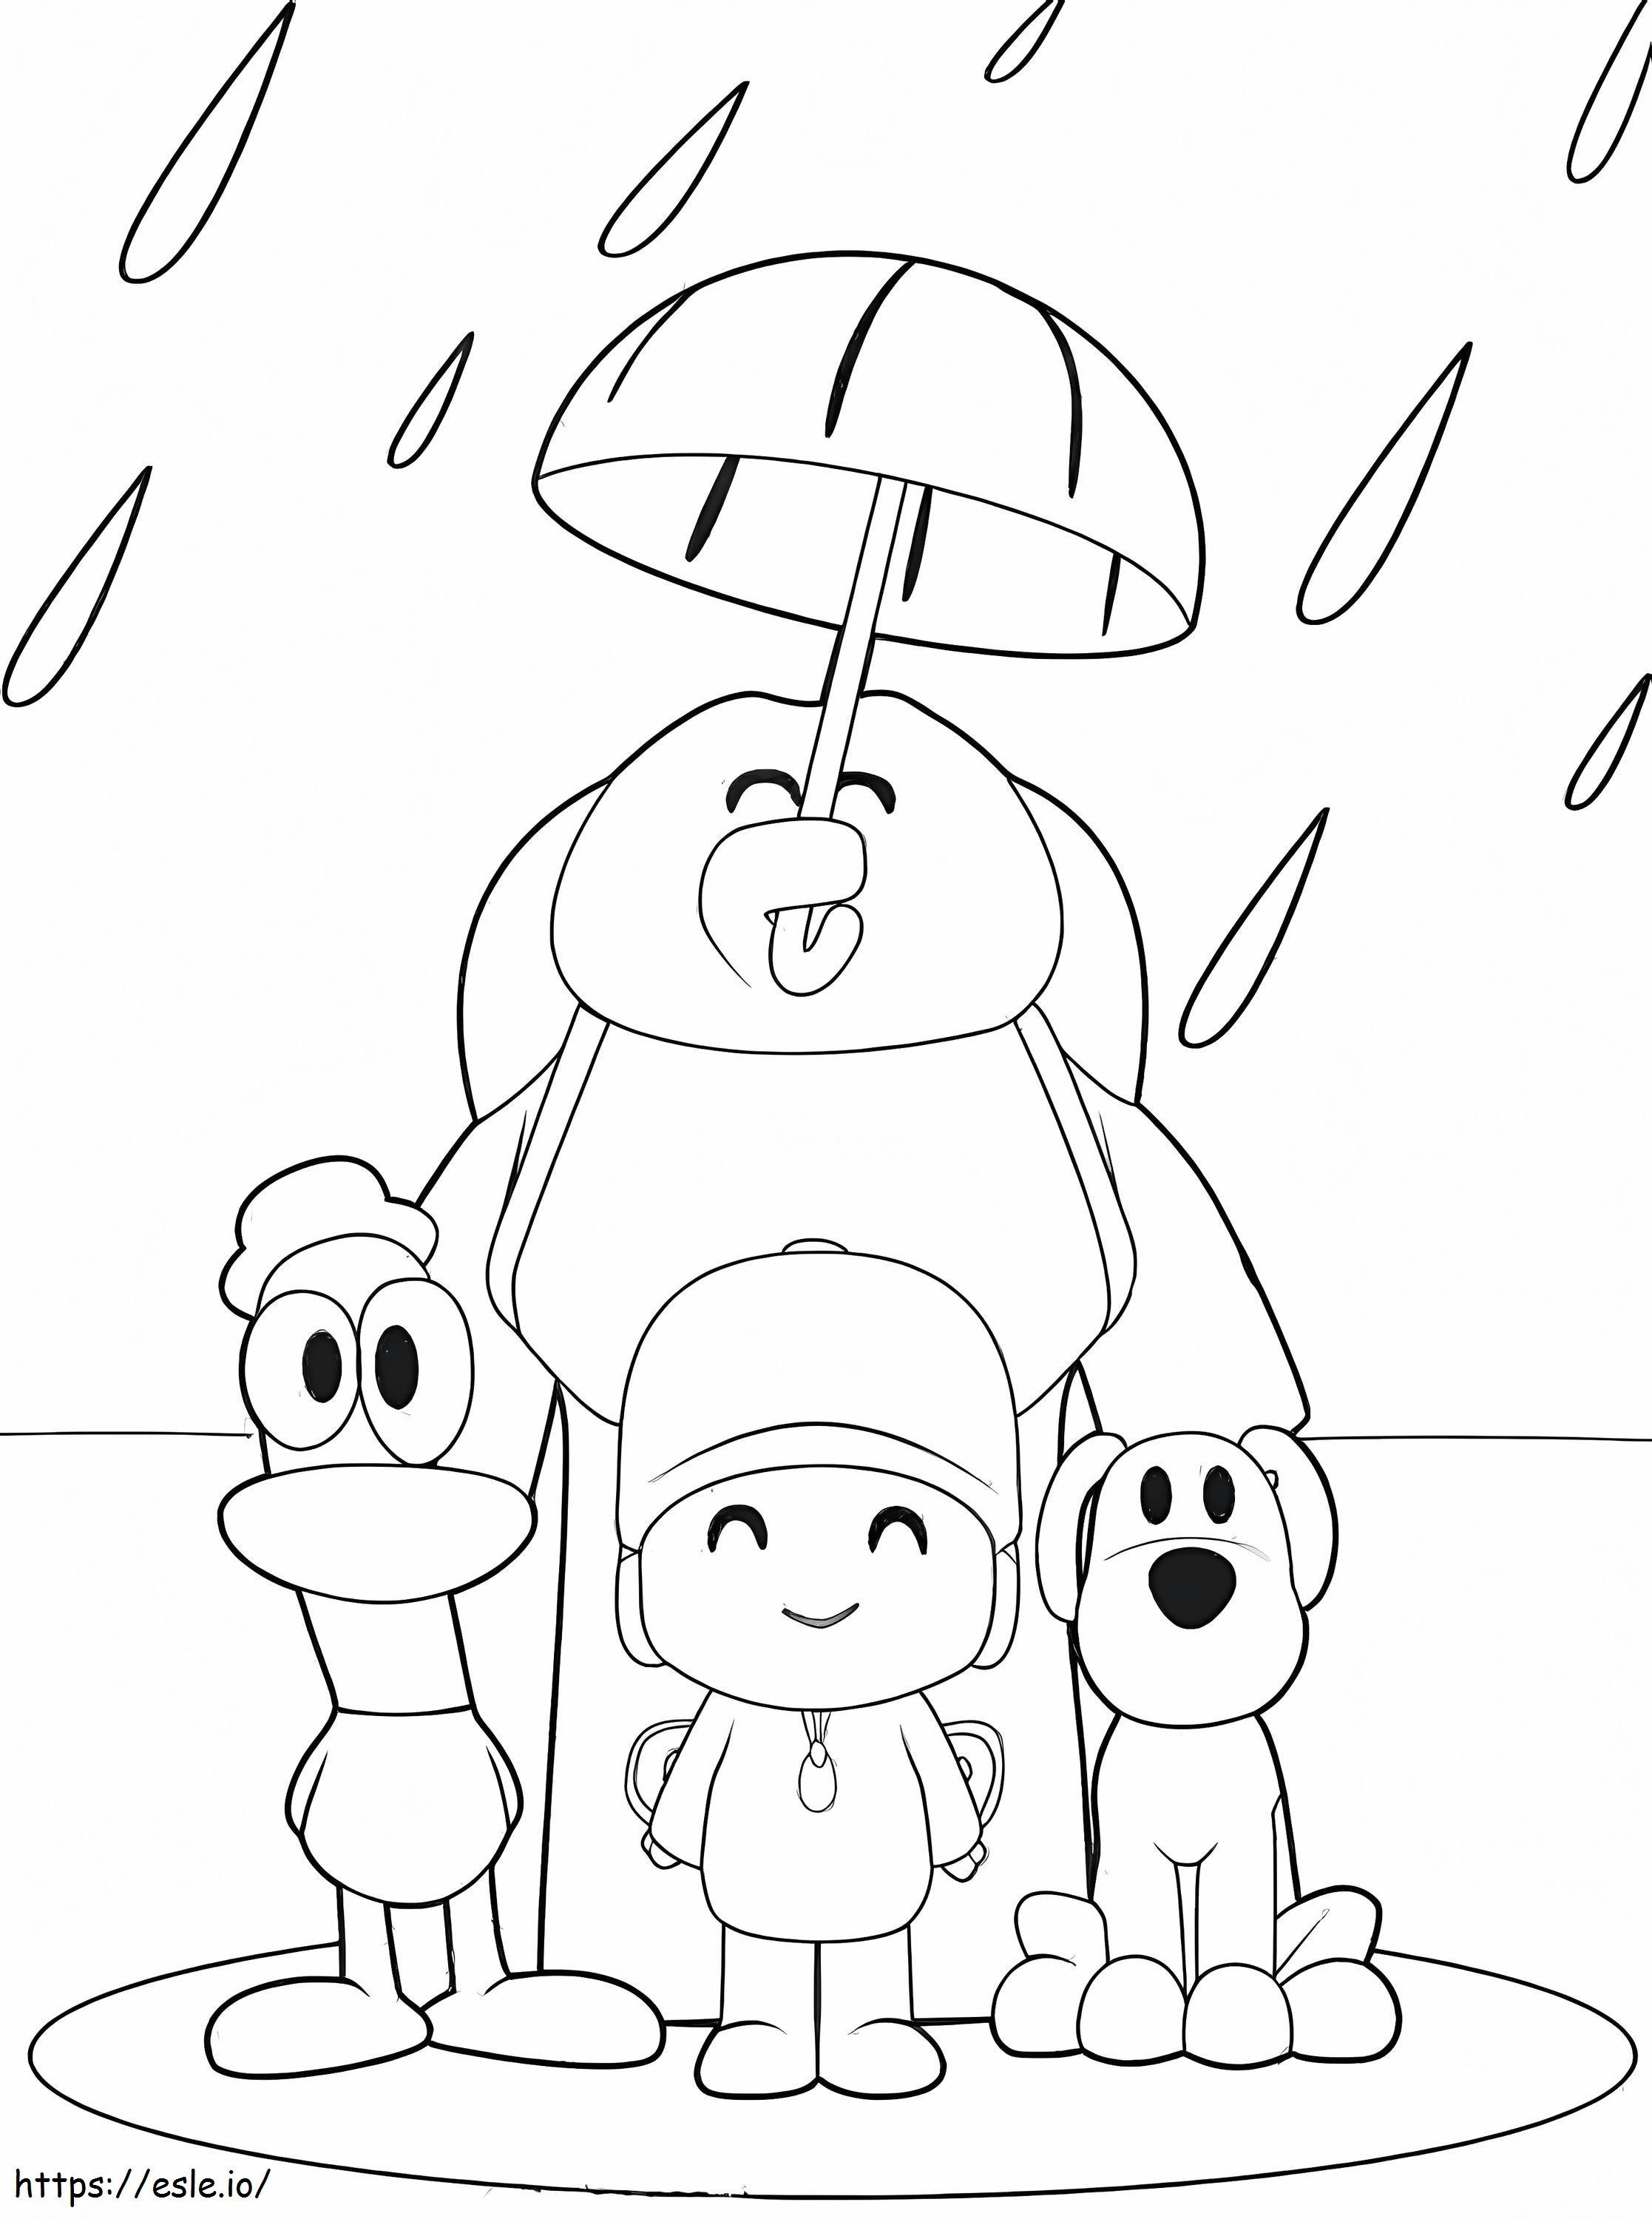 Cool Coloring Sheets To Print Out Pocoyo Pagesee Printable Stunning coloring page